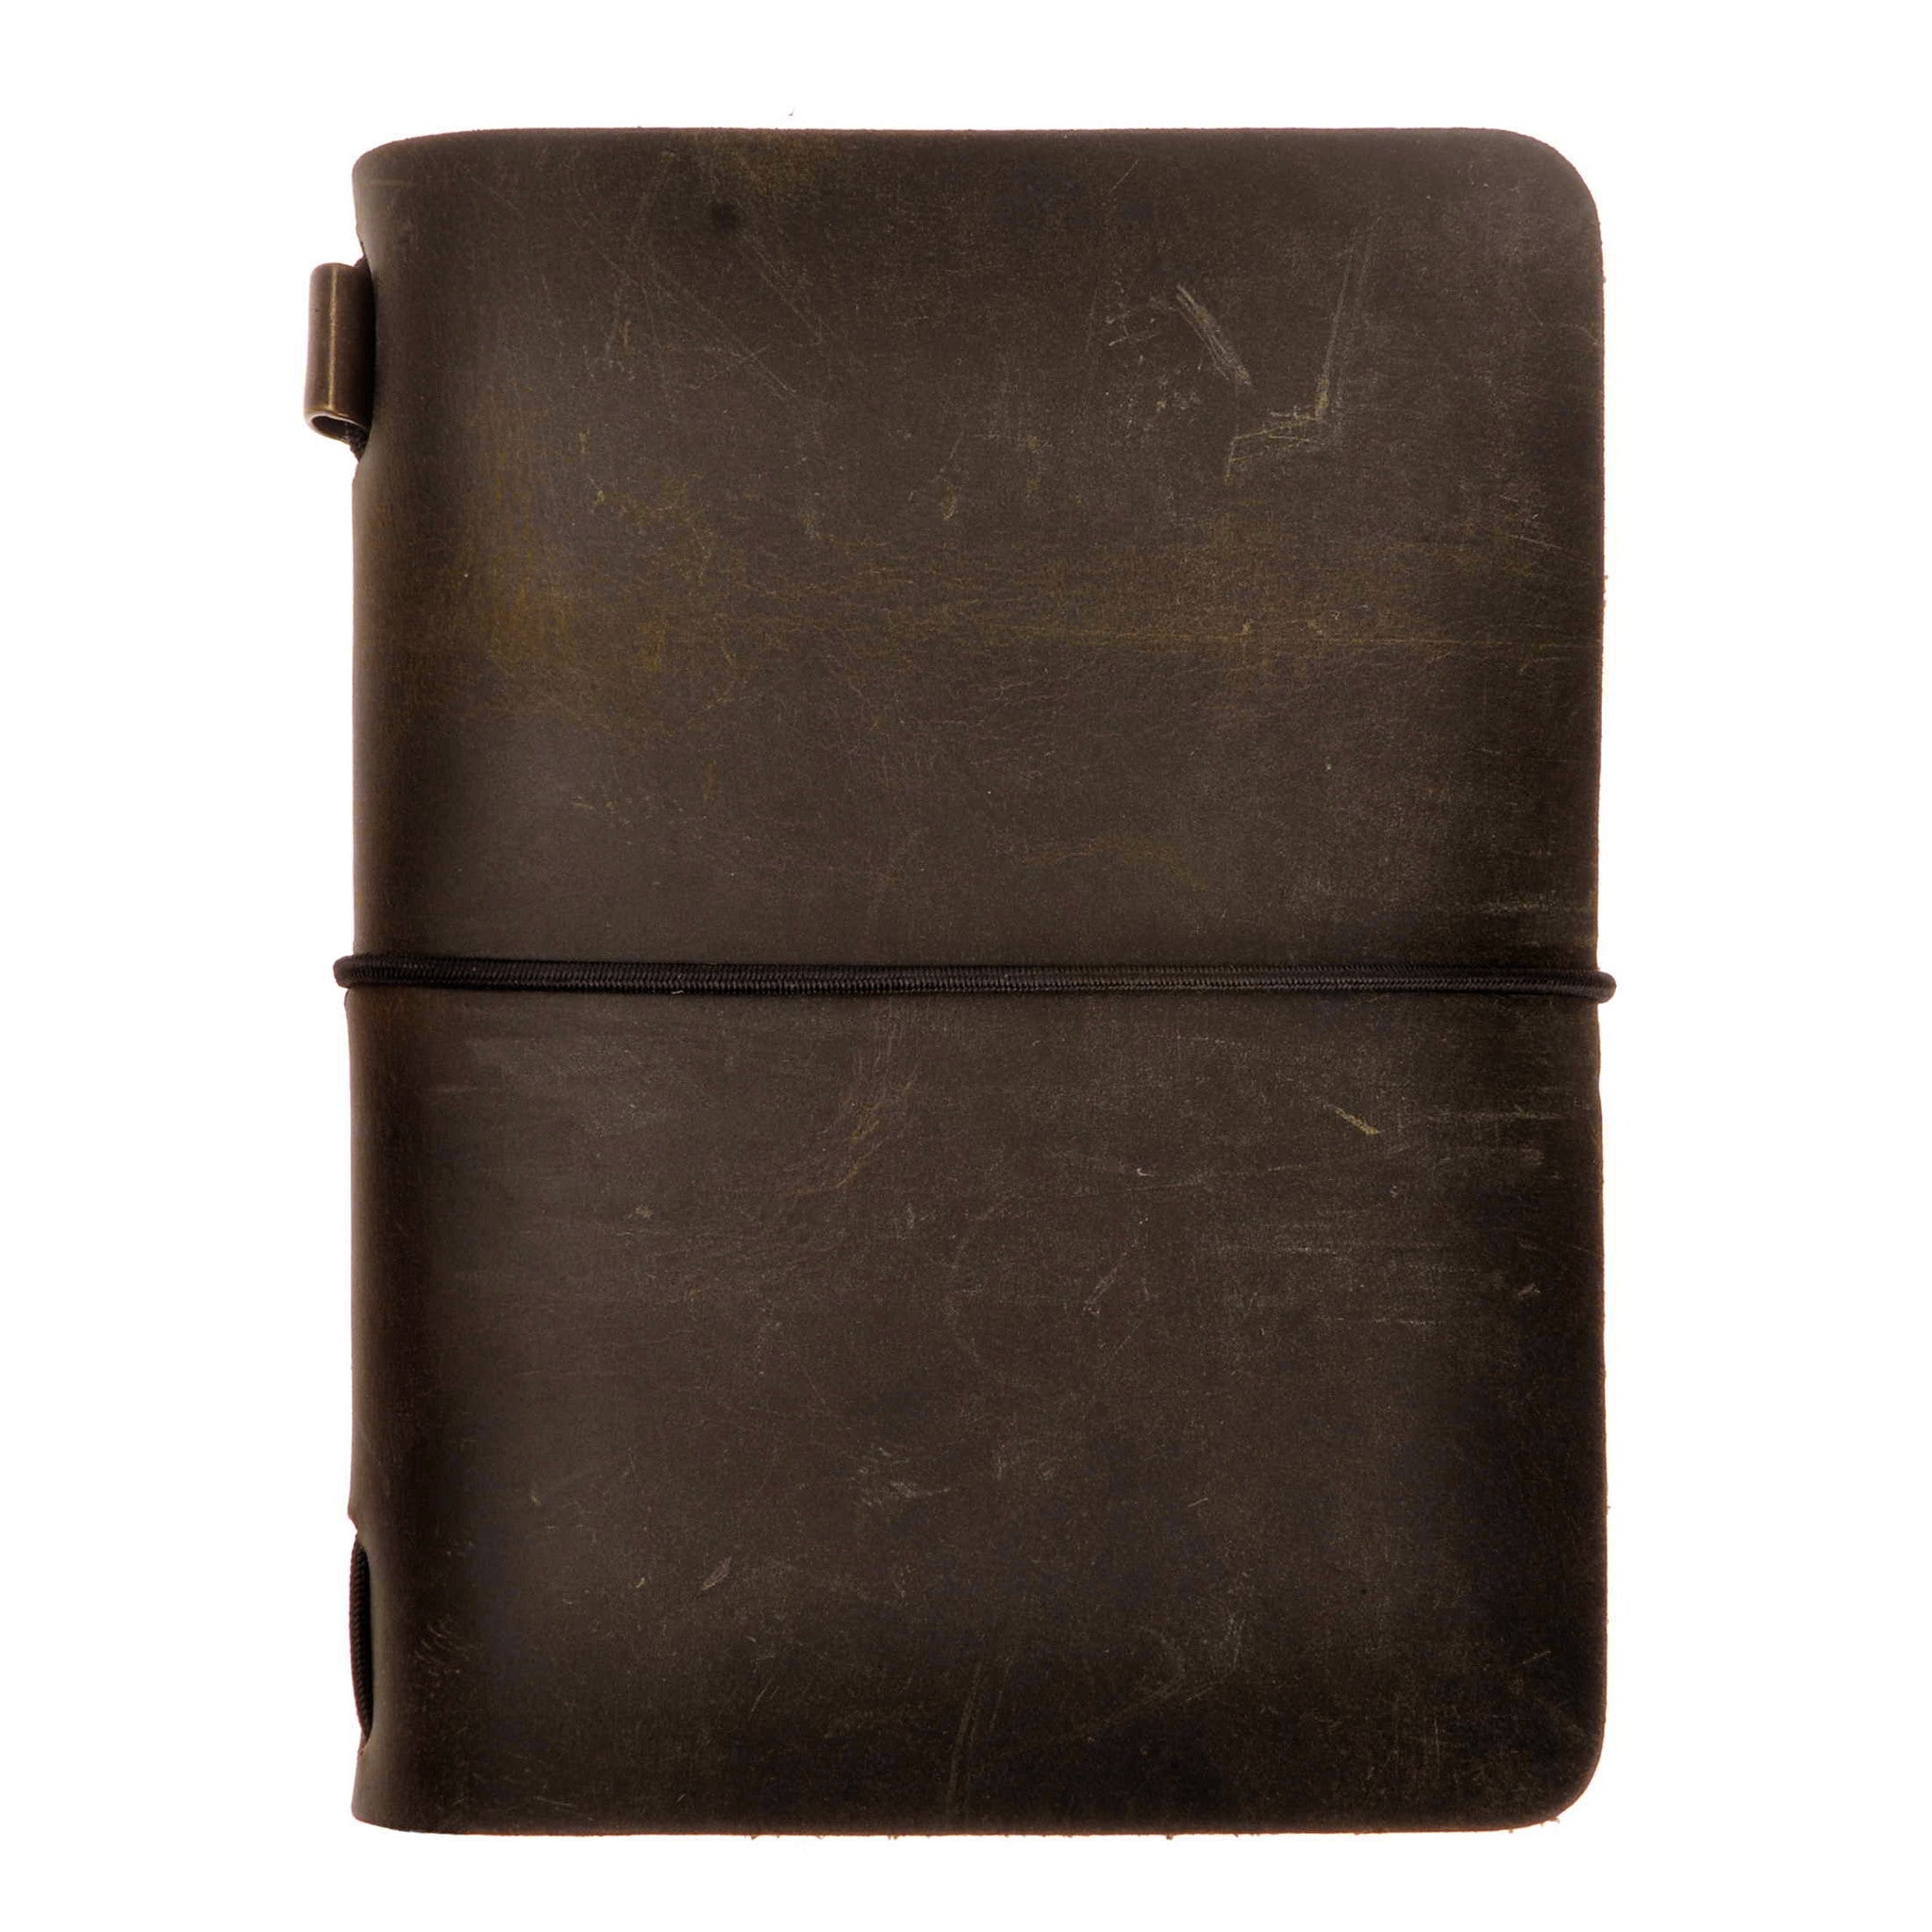 Vintage Handmade Refillable Dark Coffee Leather Passport Size Travelers Journals Diary Notepad Notebook